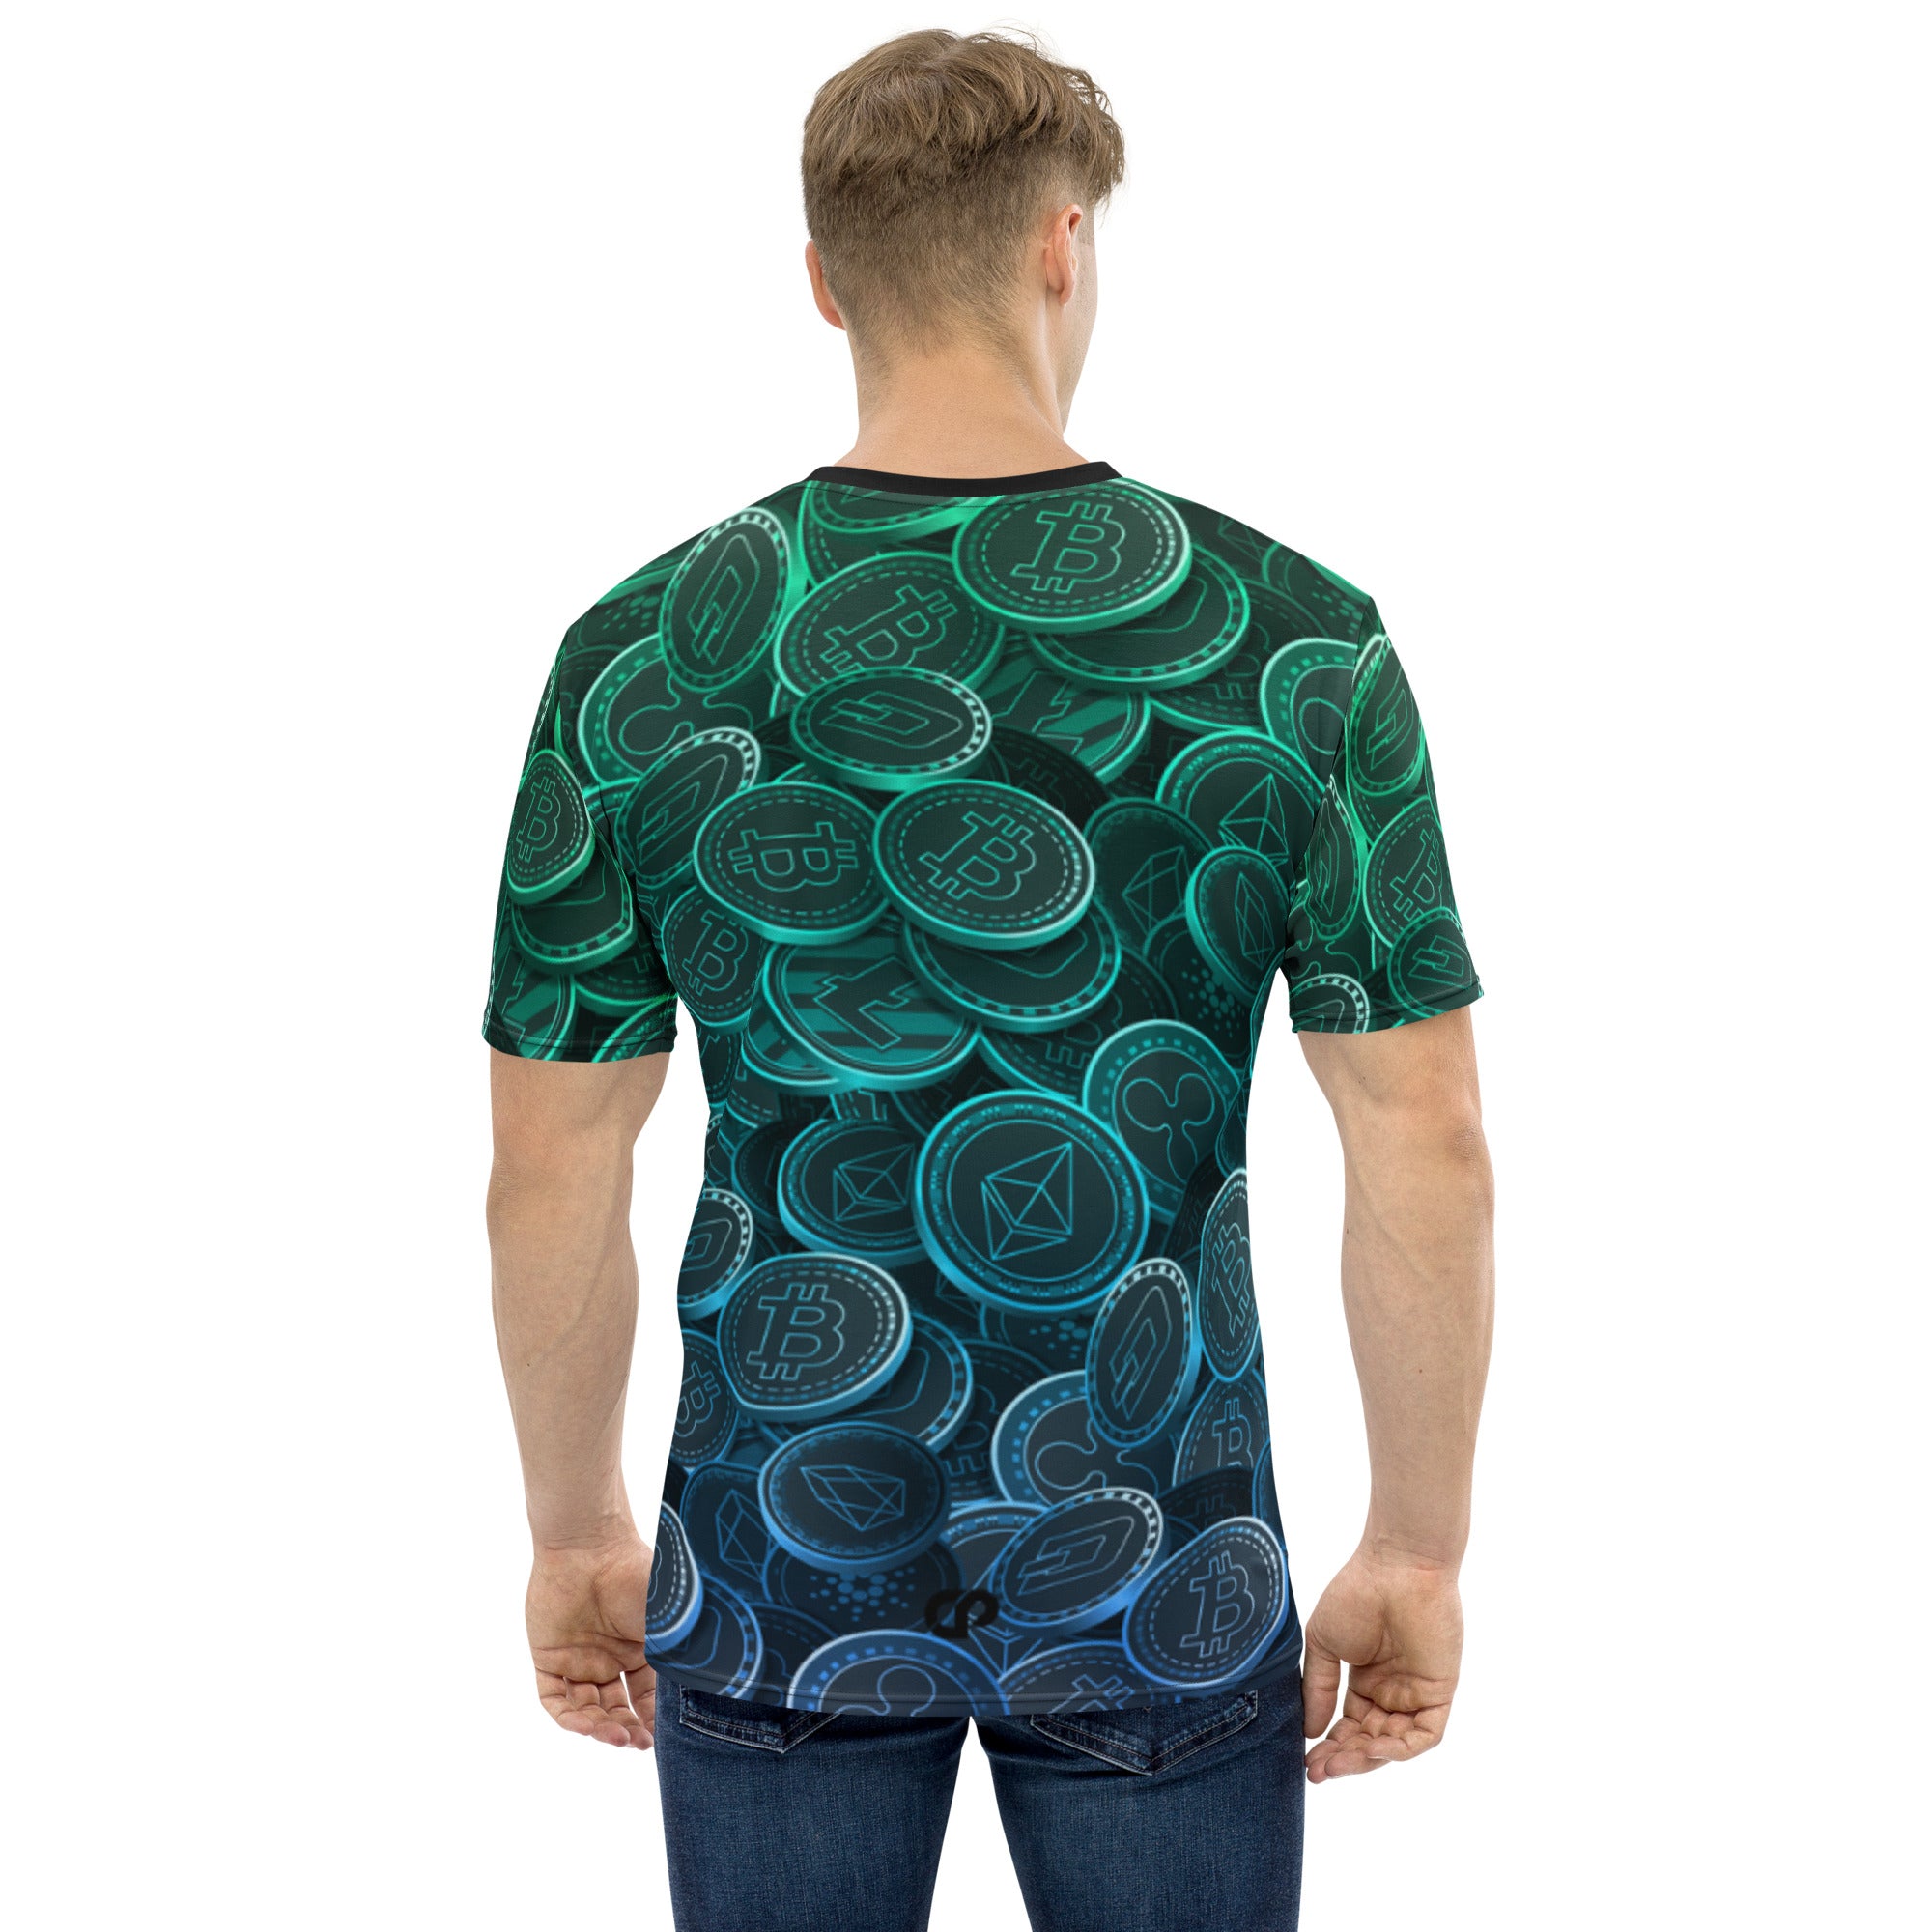 Crypto Coins All Over Print T-Shirt - CRYPTOPRNR®